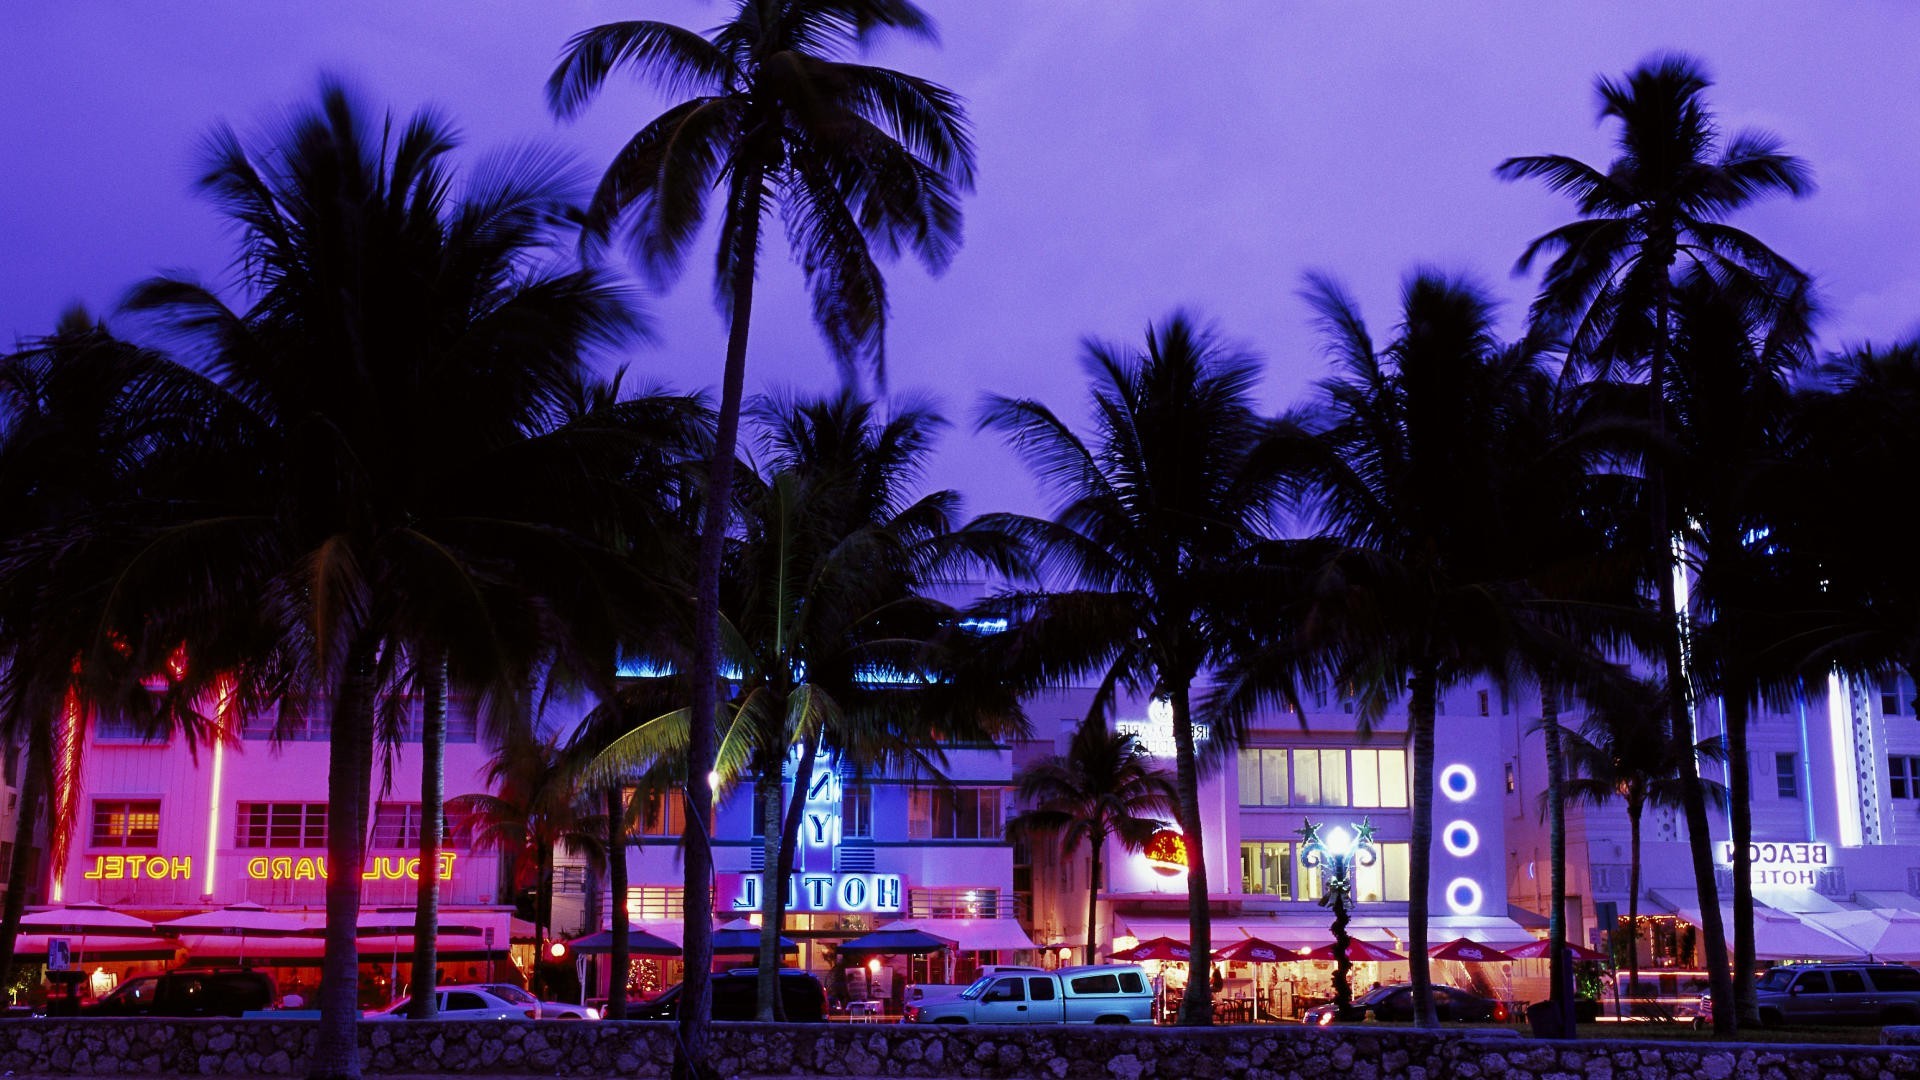 Grand Theft Auto Vice City, Hotels, Beach, Palm Trees, Neon, Evening Wallpaper